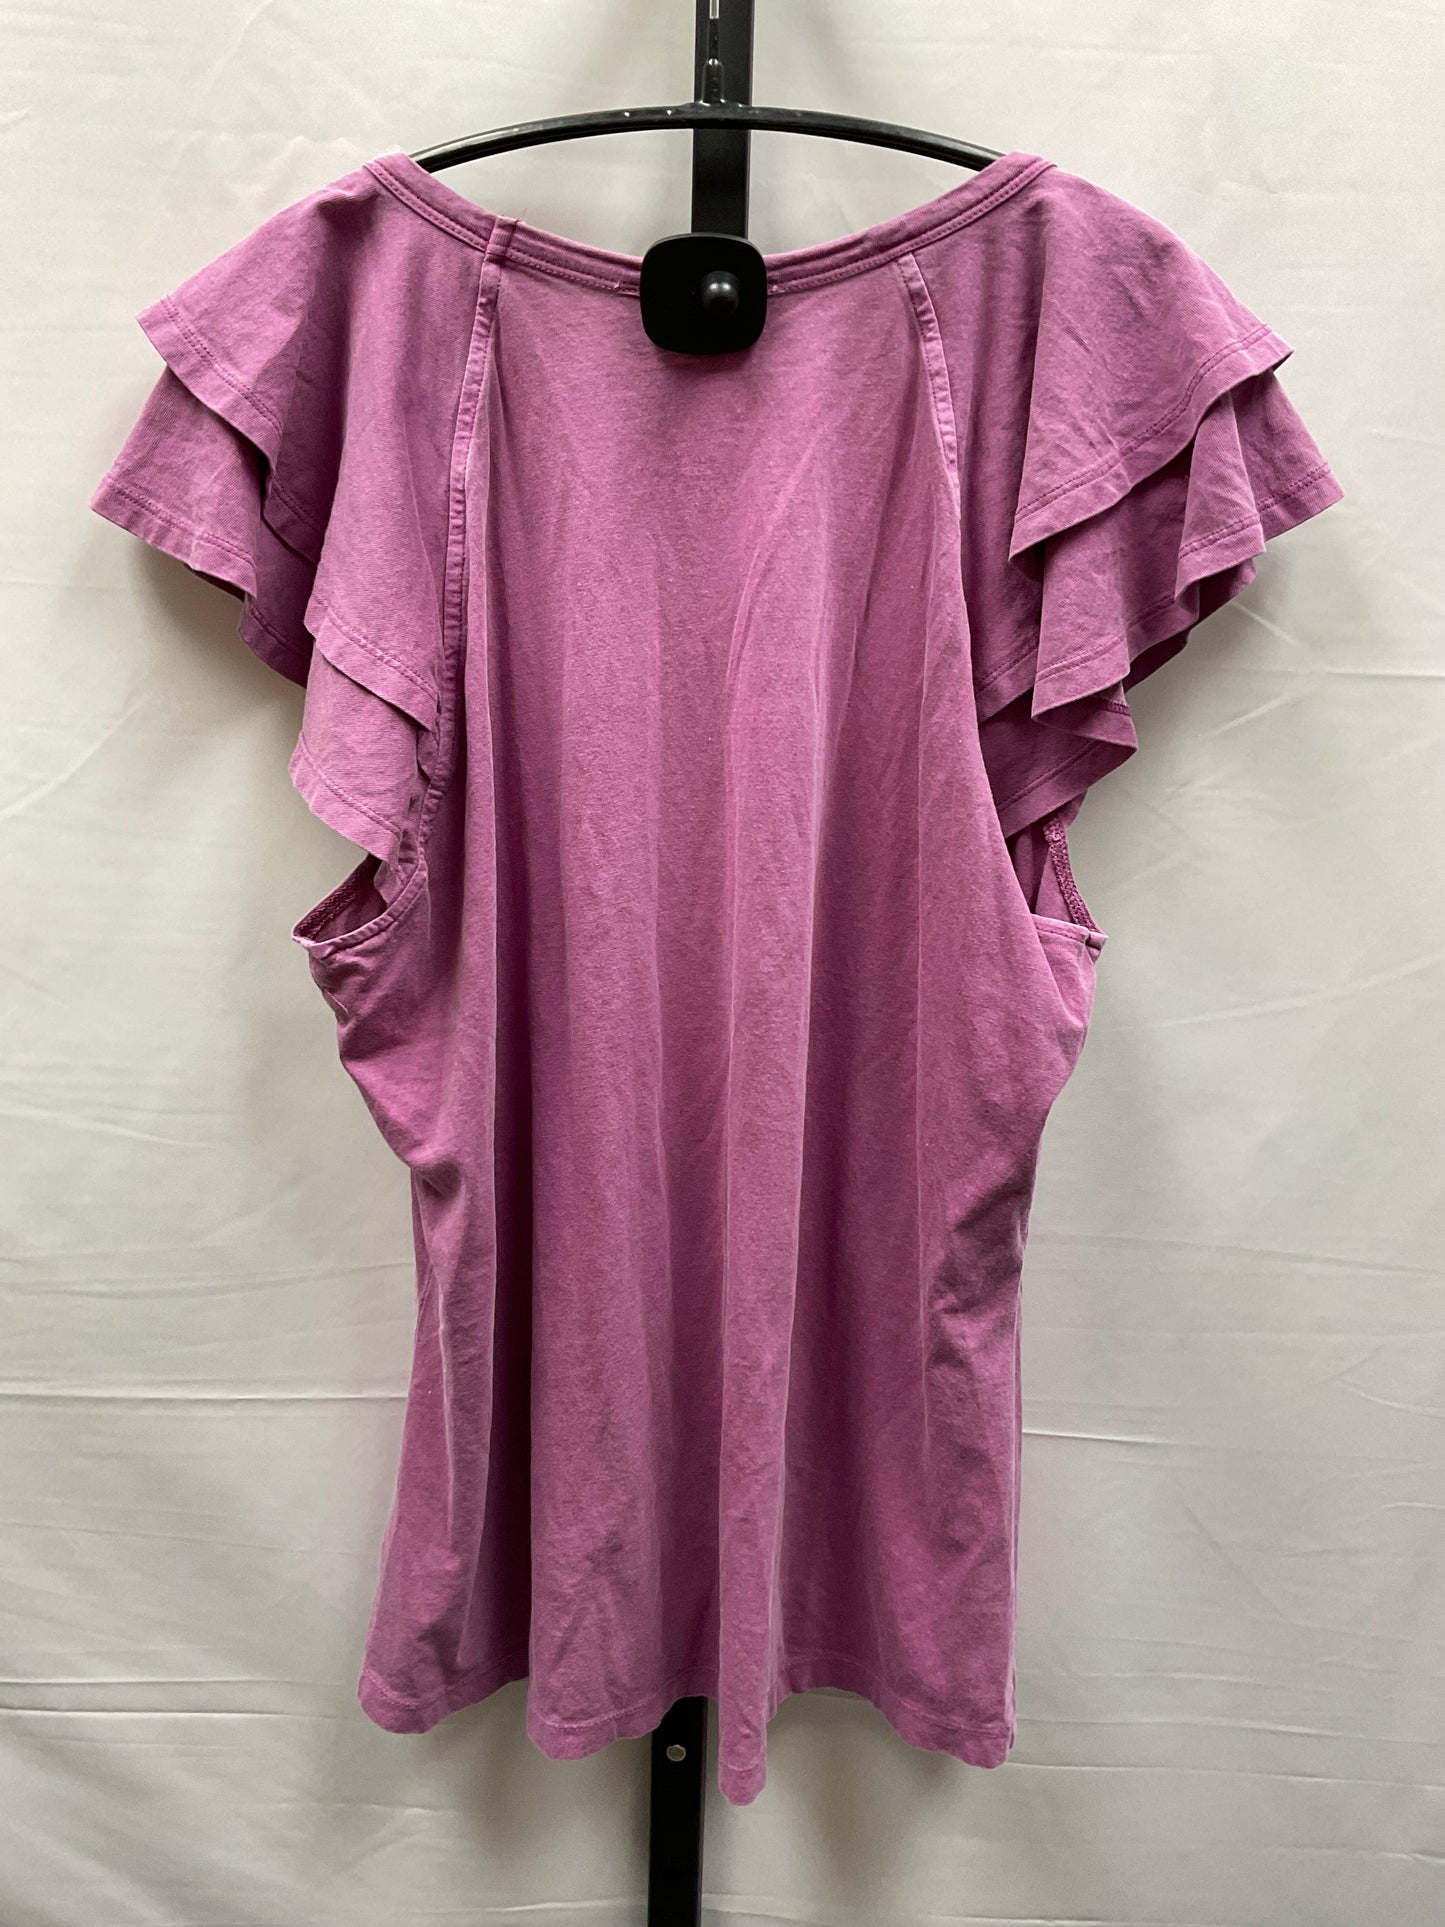 Purple Top Short Sleeve Time And Tru, Size Xl